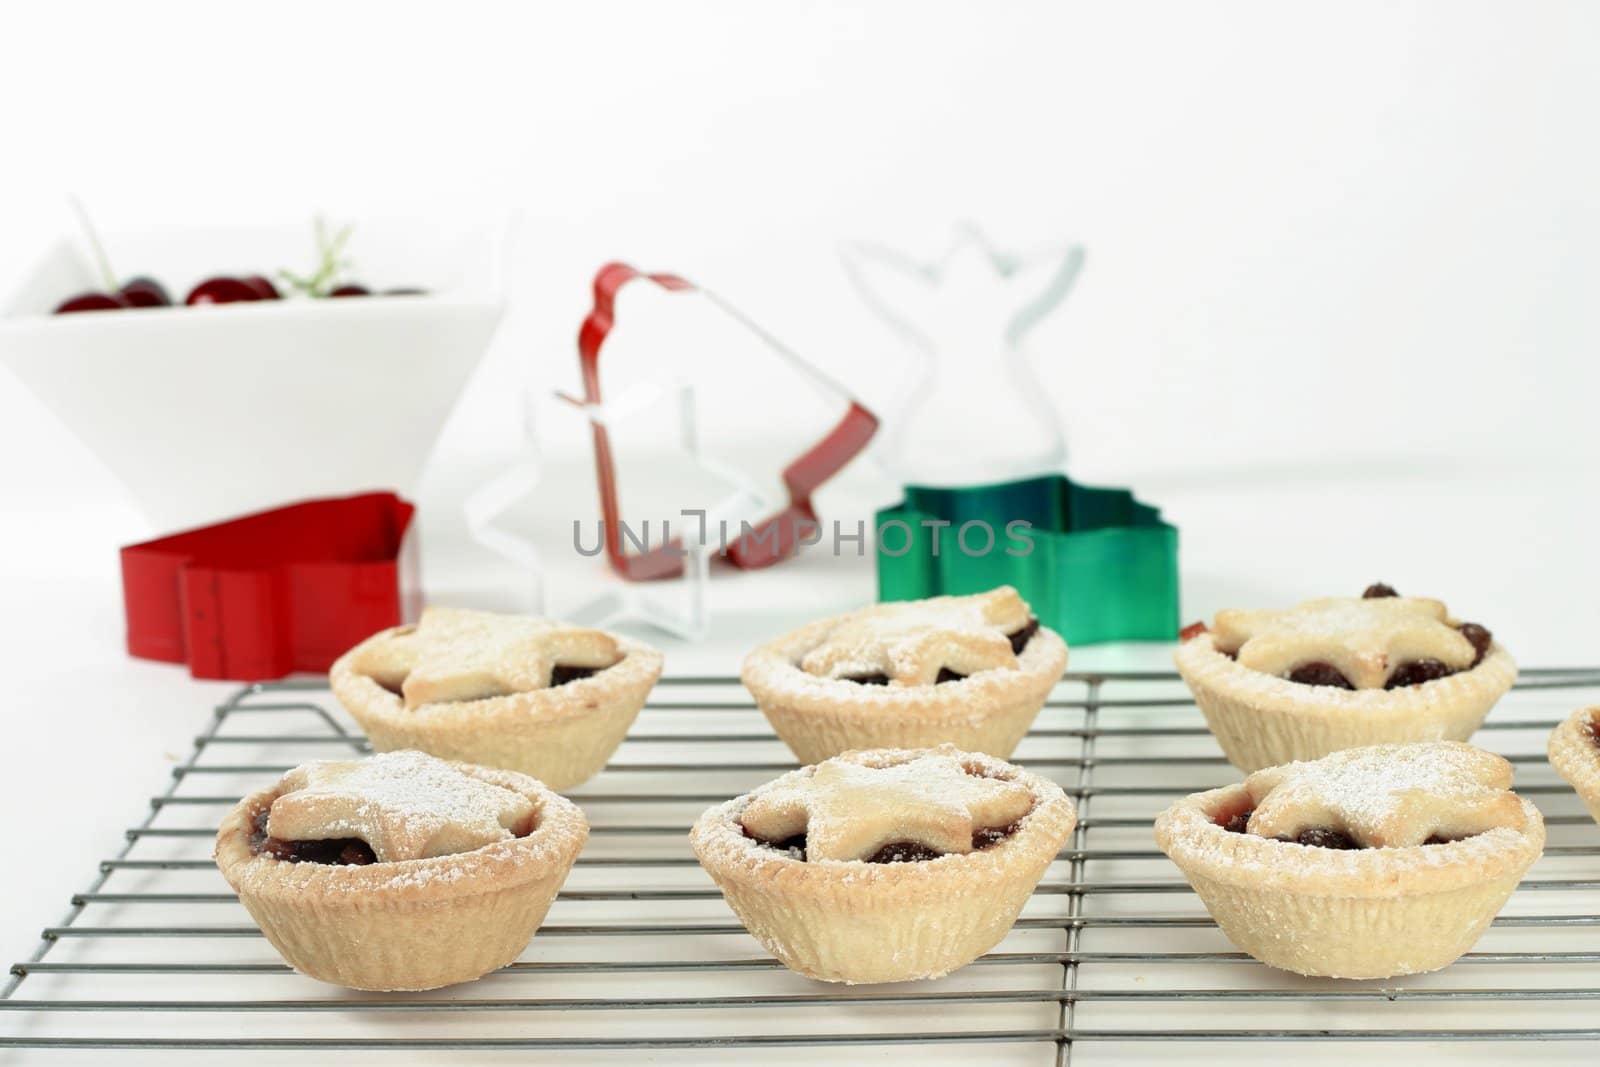 Small fruit tarts with festive star tops dusted with icing sugar sitting on a wire cooler.  
Focus on foreground.